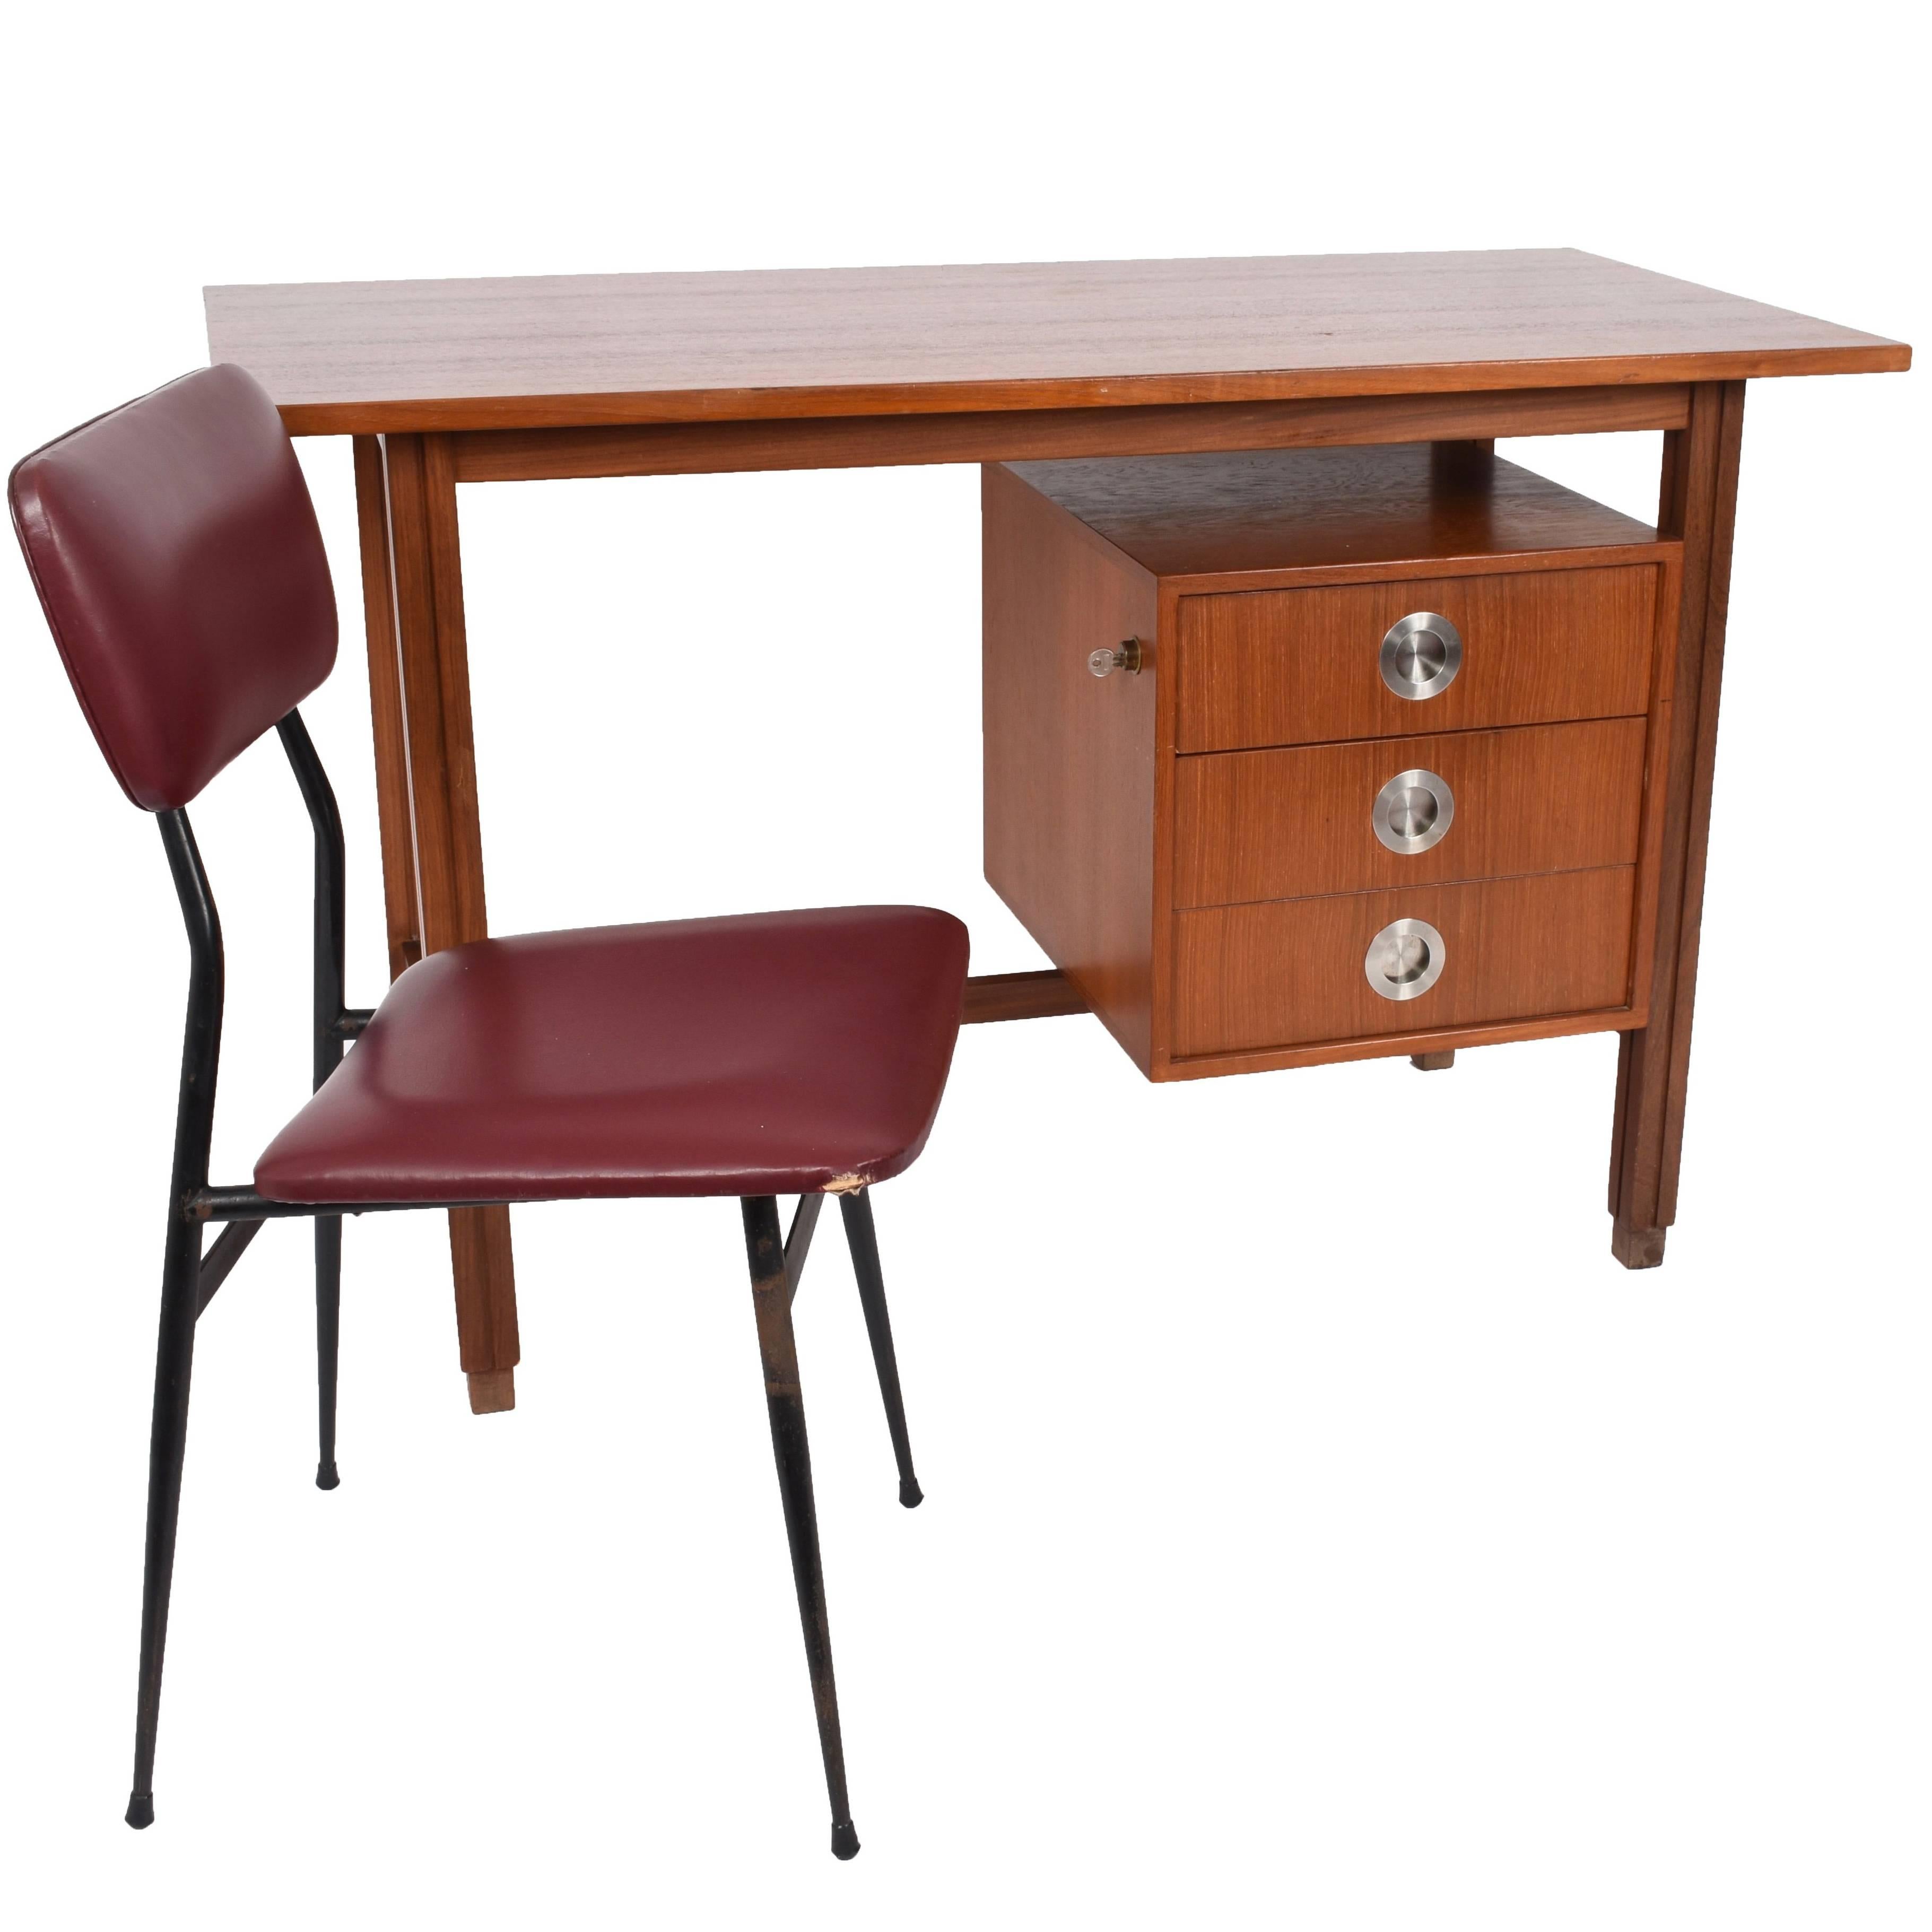 Small teak desk with brushed steel handles. Lateral lock with original key. Beautiful piece and in excellent condition. The chair is complimentary and is remarkably beautiful (has signs of wear but is beautiful) in iron covered in sky.